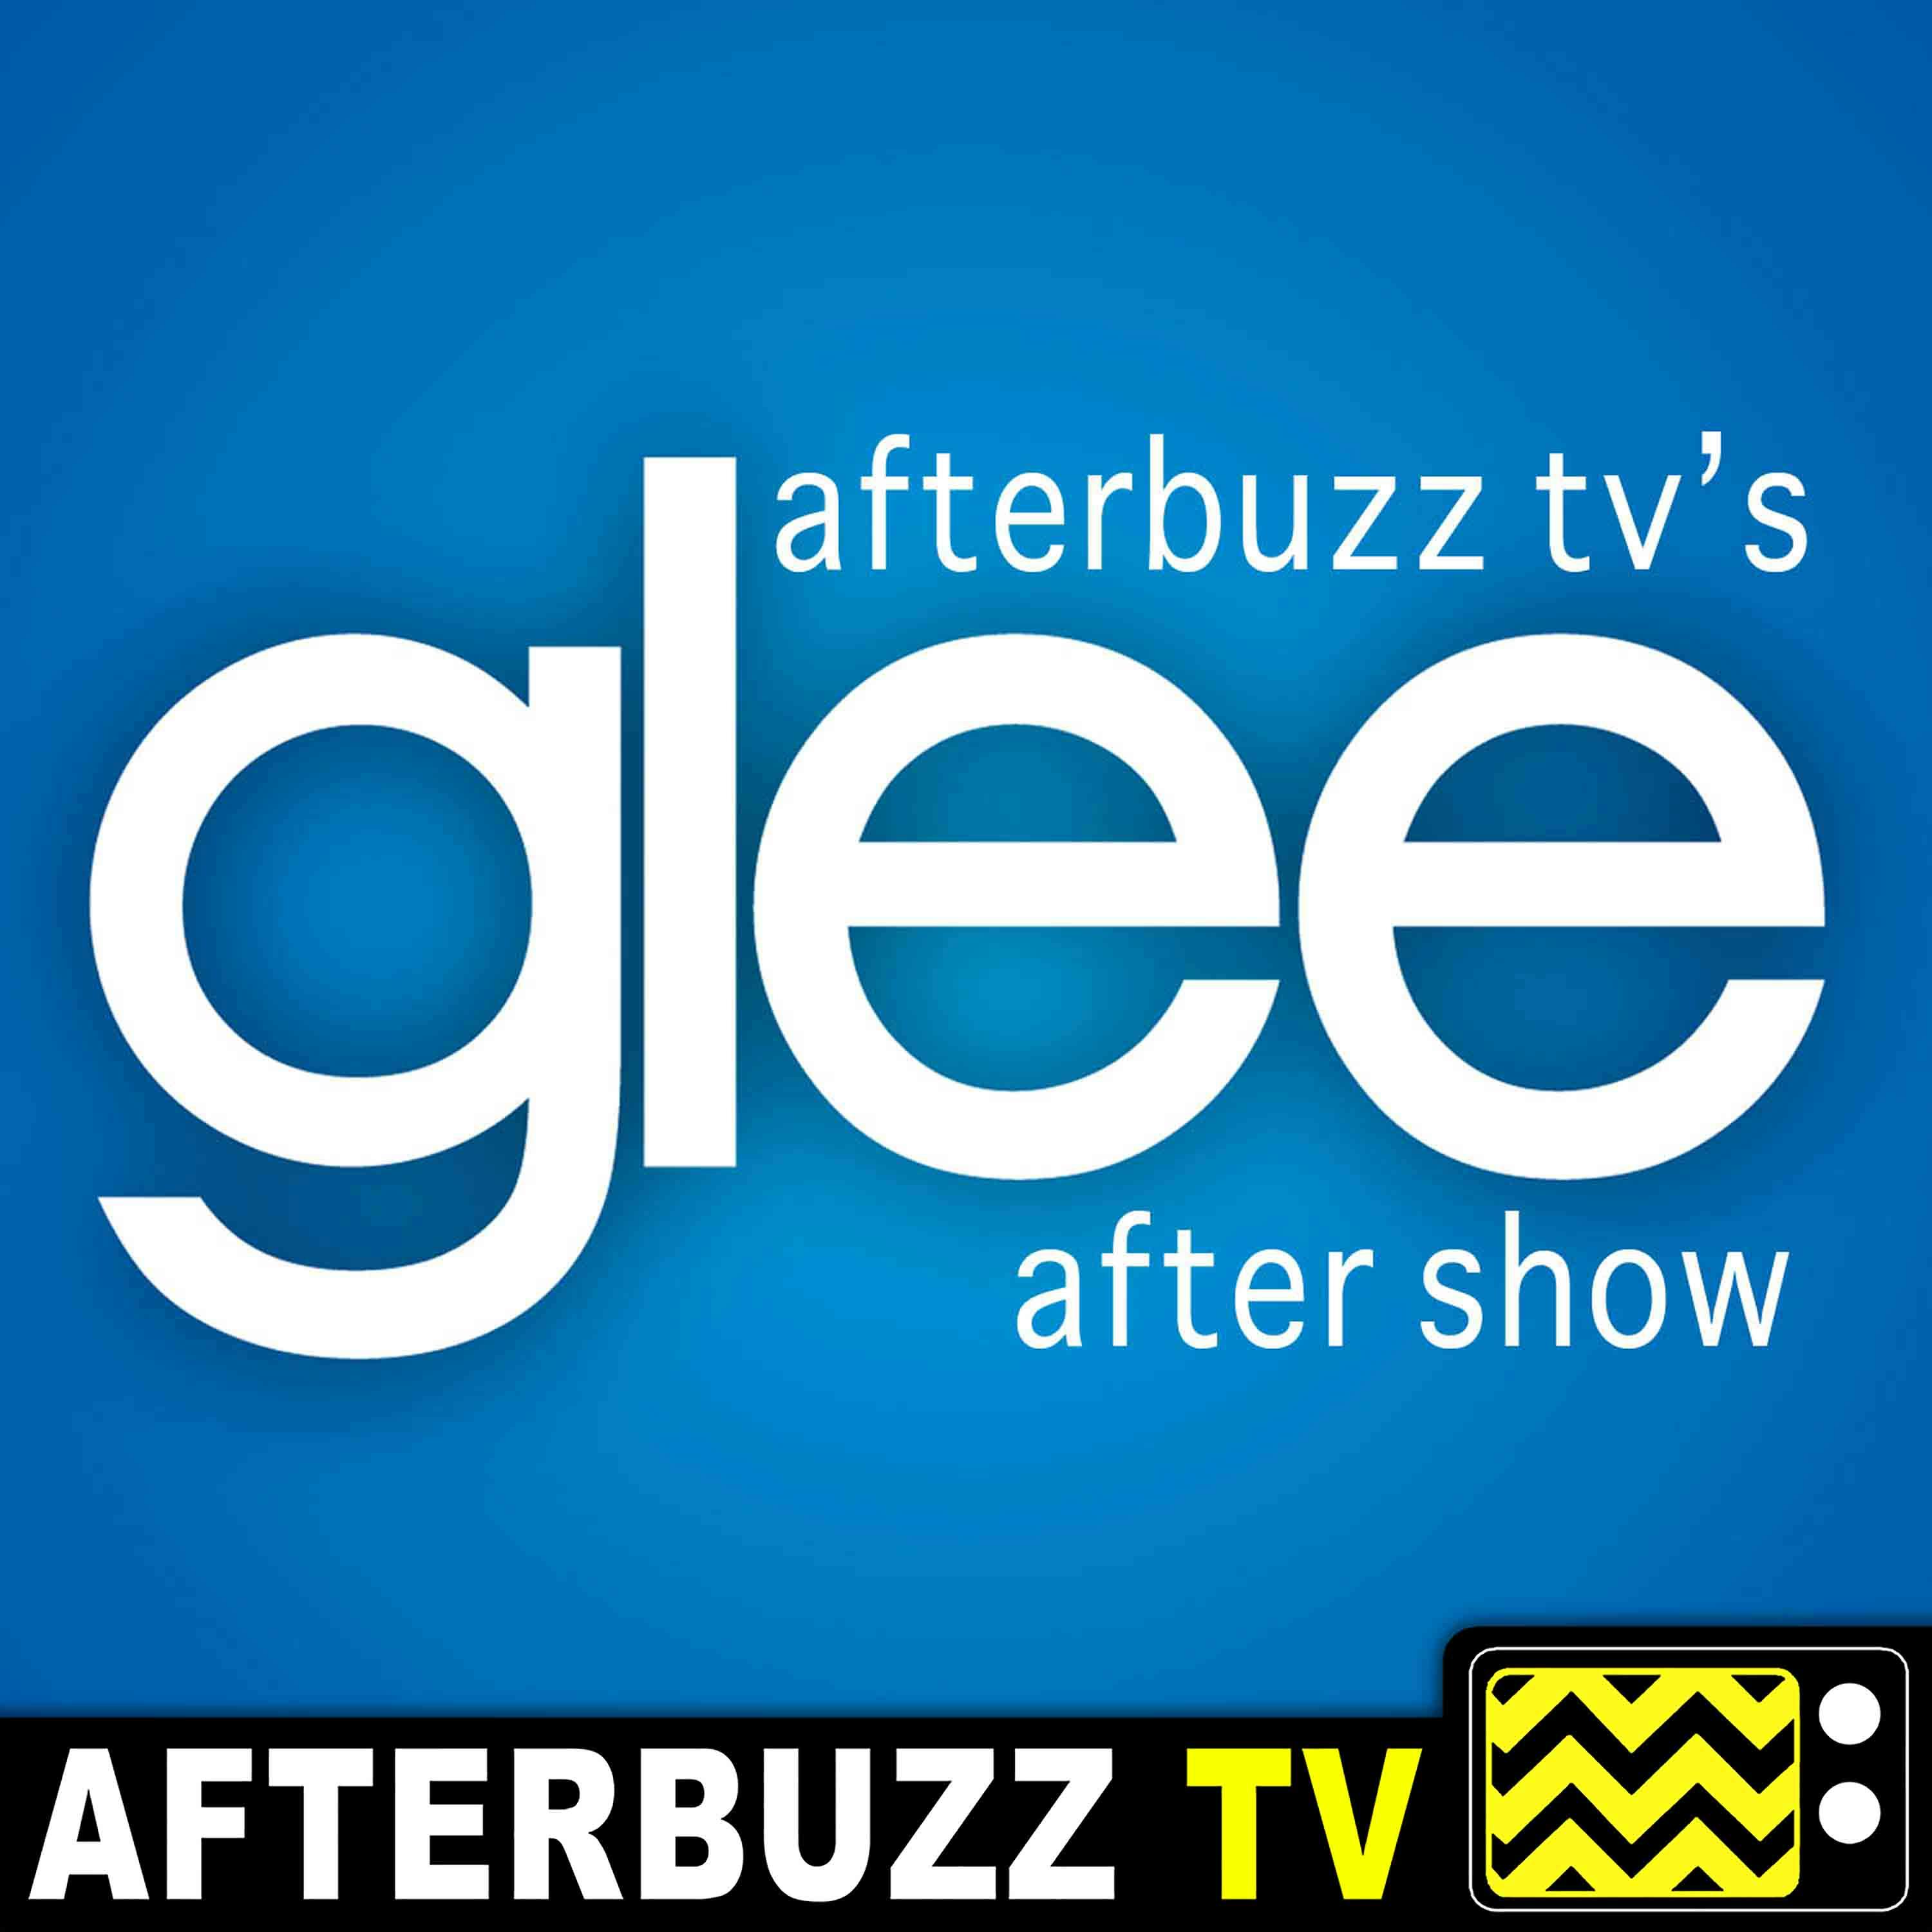 Glee S:6 | Loser Like Me; Homecoming E:1 & E:2 | AfterBuzz TV AfterShow